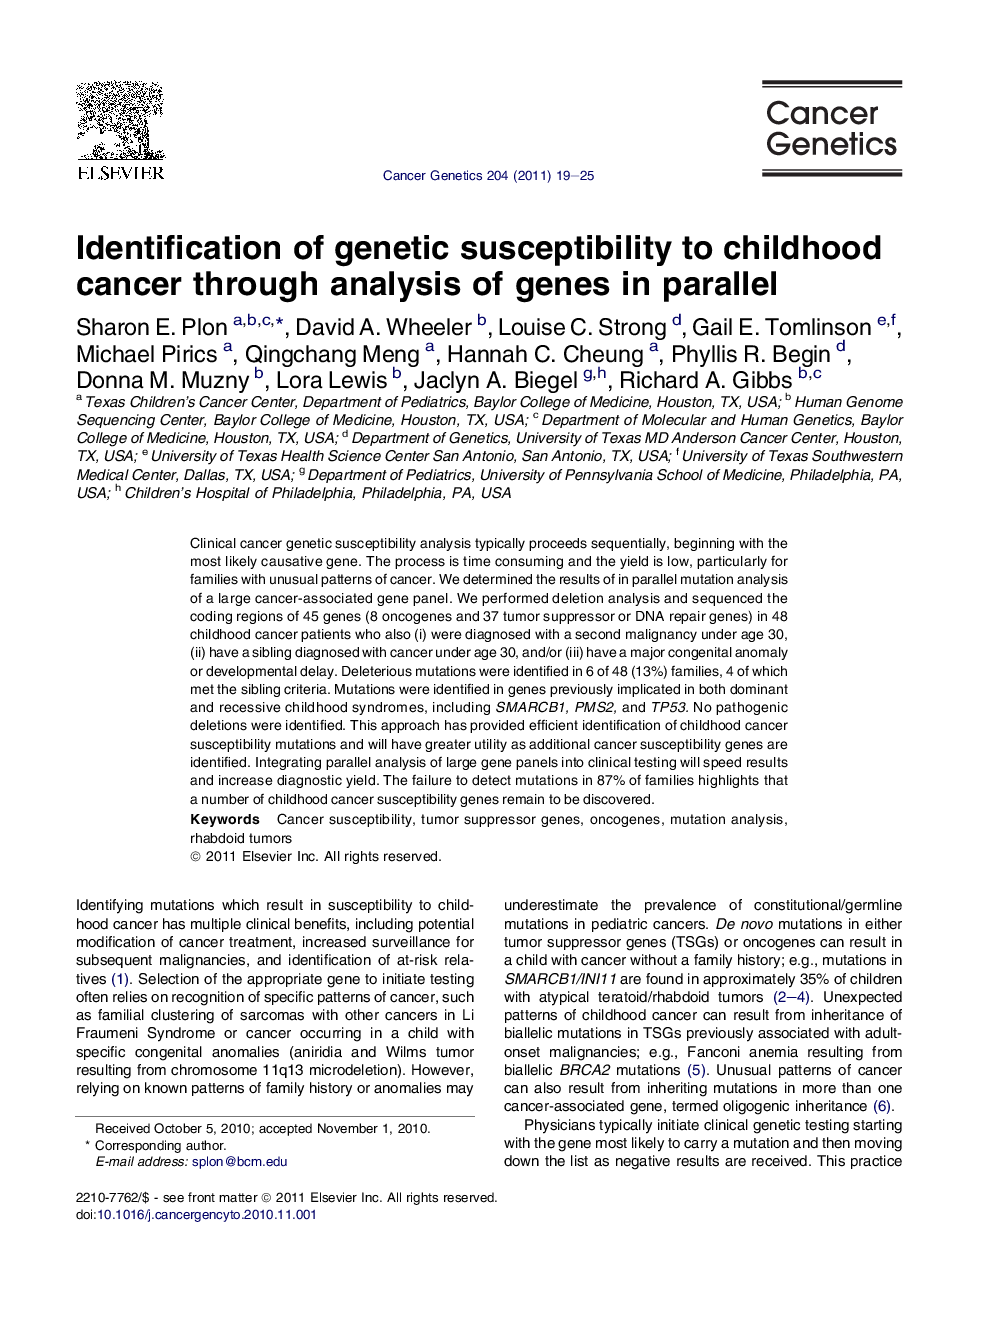 Identification of genetic susceptibility to childhood cancer through analysis of genes in parallel